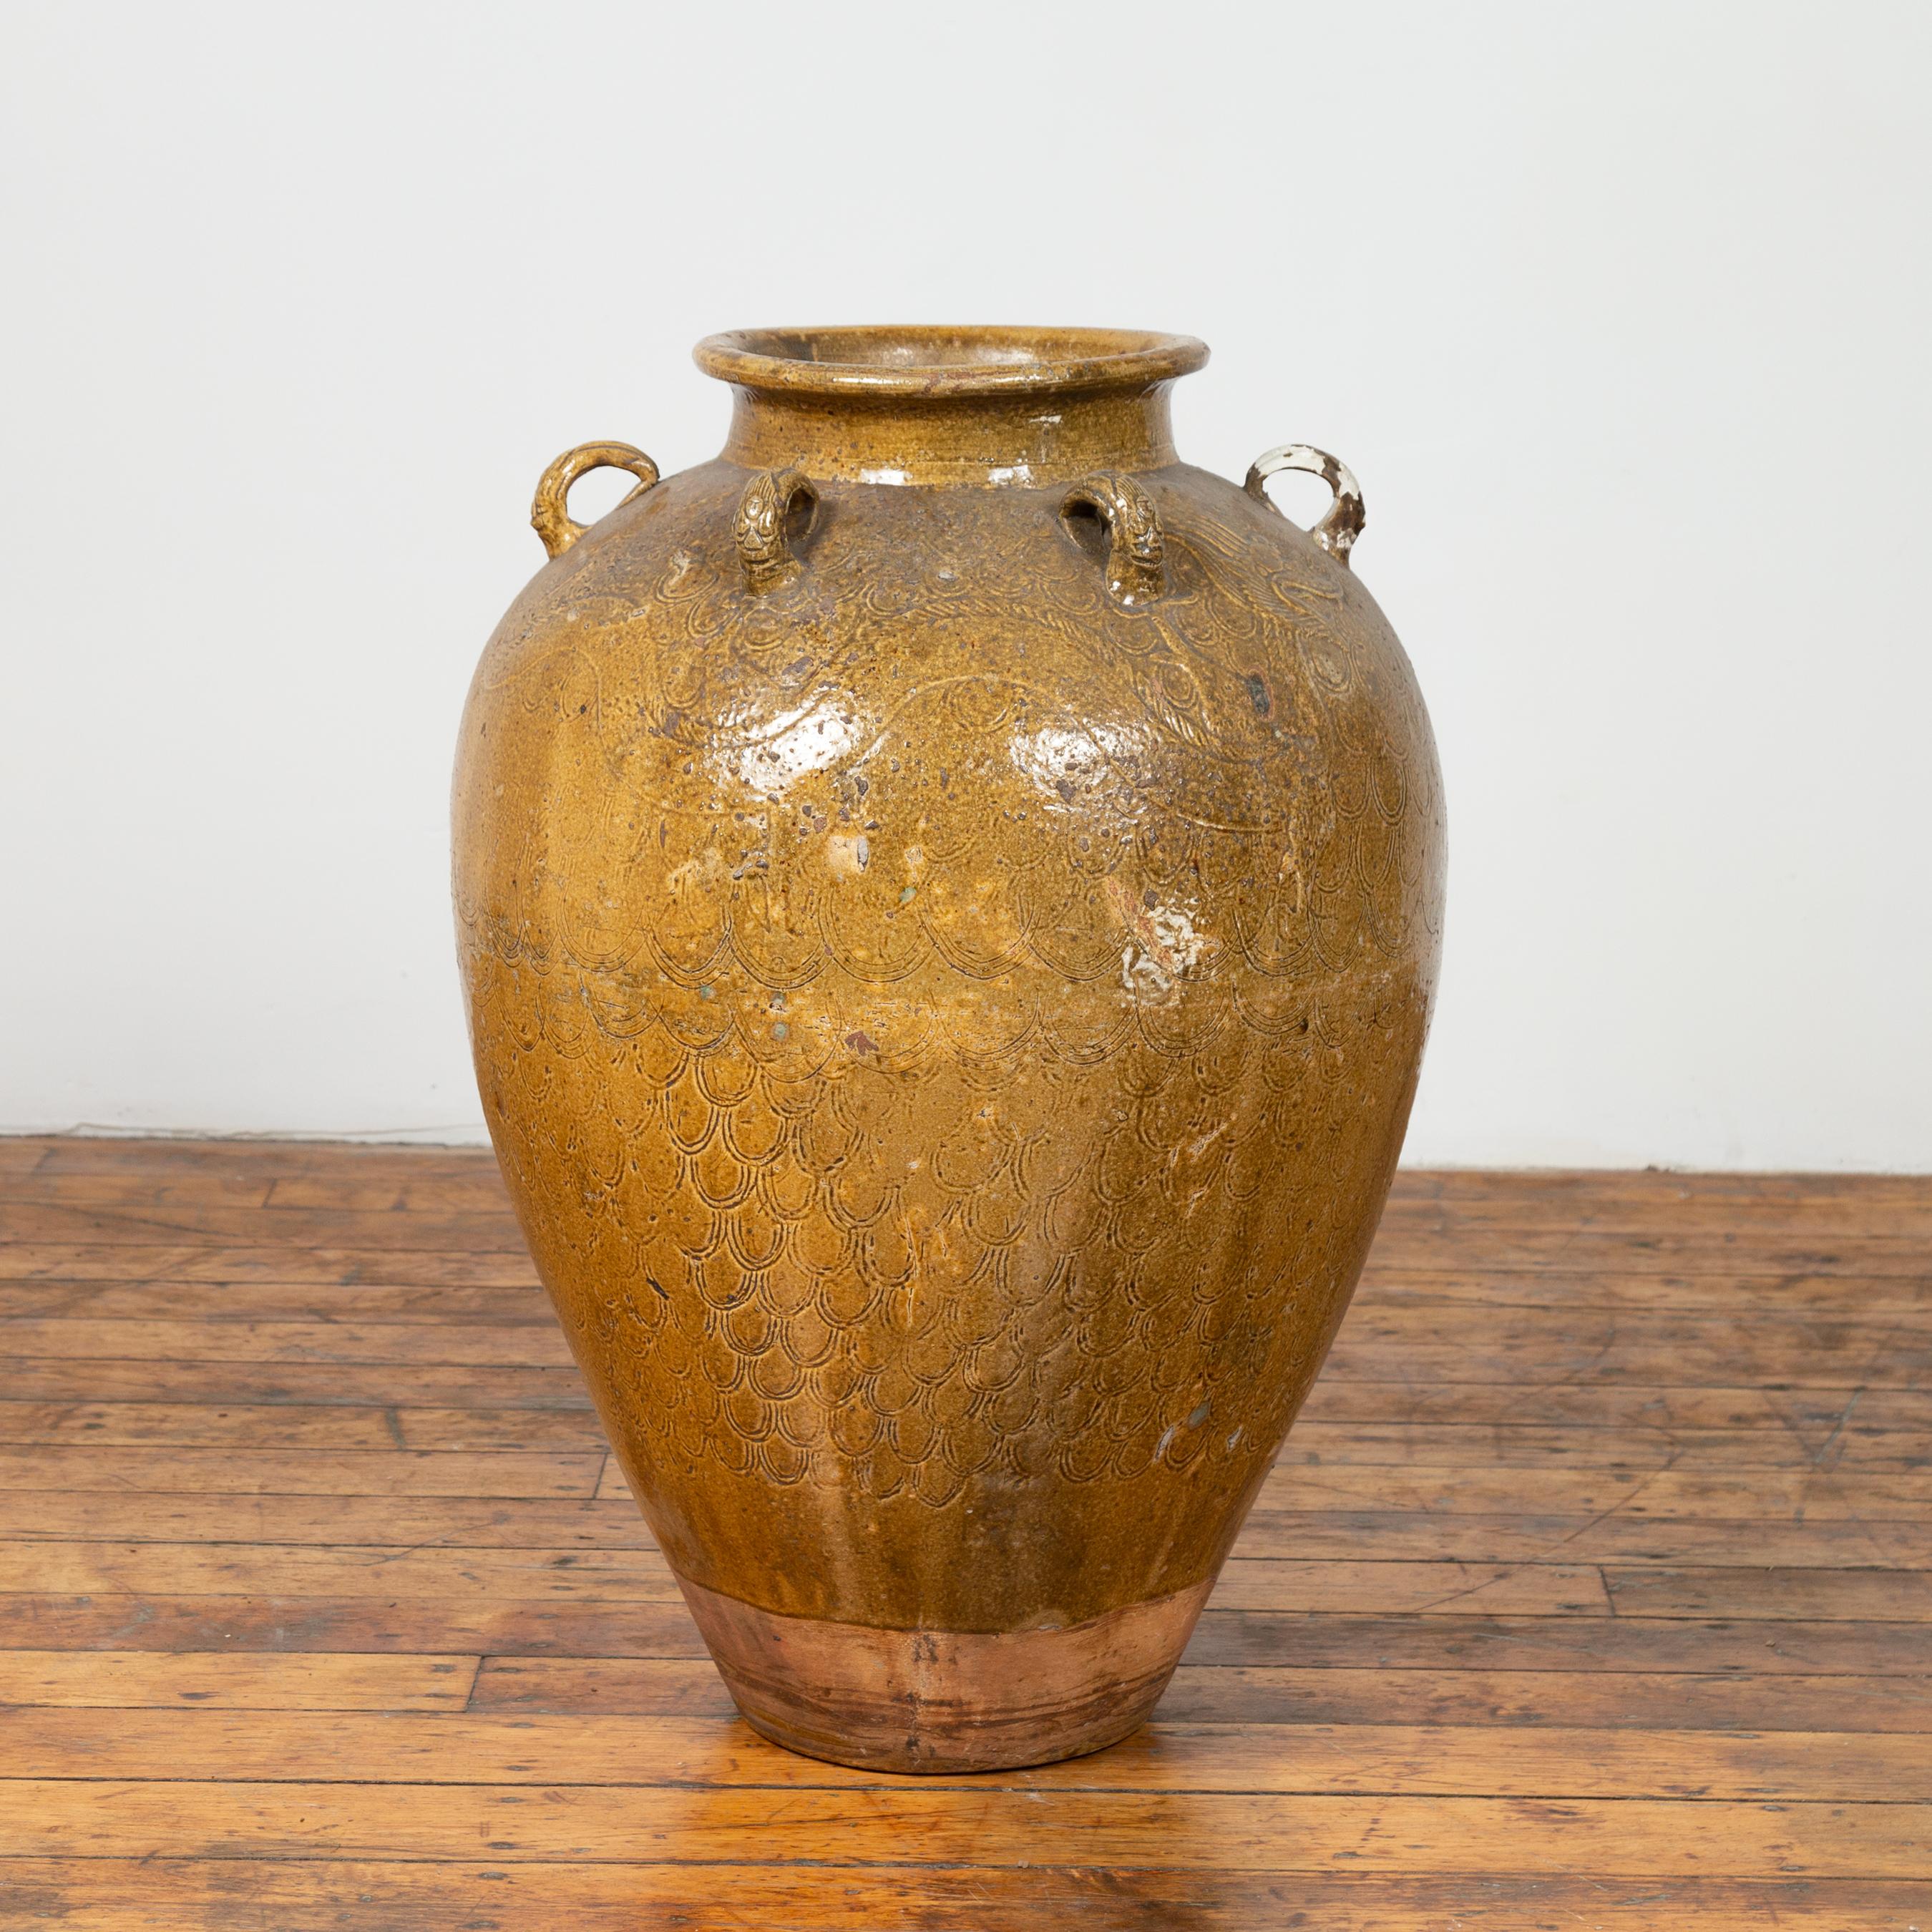 A South Eastern 19th century Martaban water jar with dragon motifs and petite handles. Used as a storage vessel to ship food and water, this Martaban jar charms our eyes with its nice proportions and lovely color. Originating from the city of